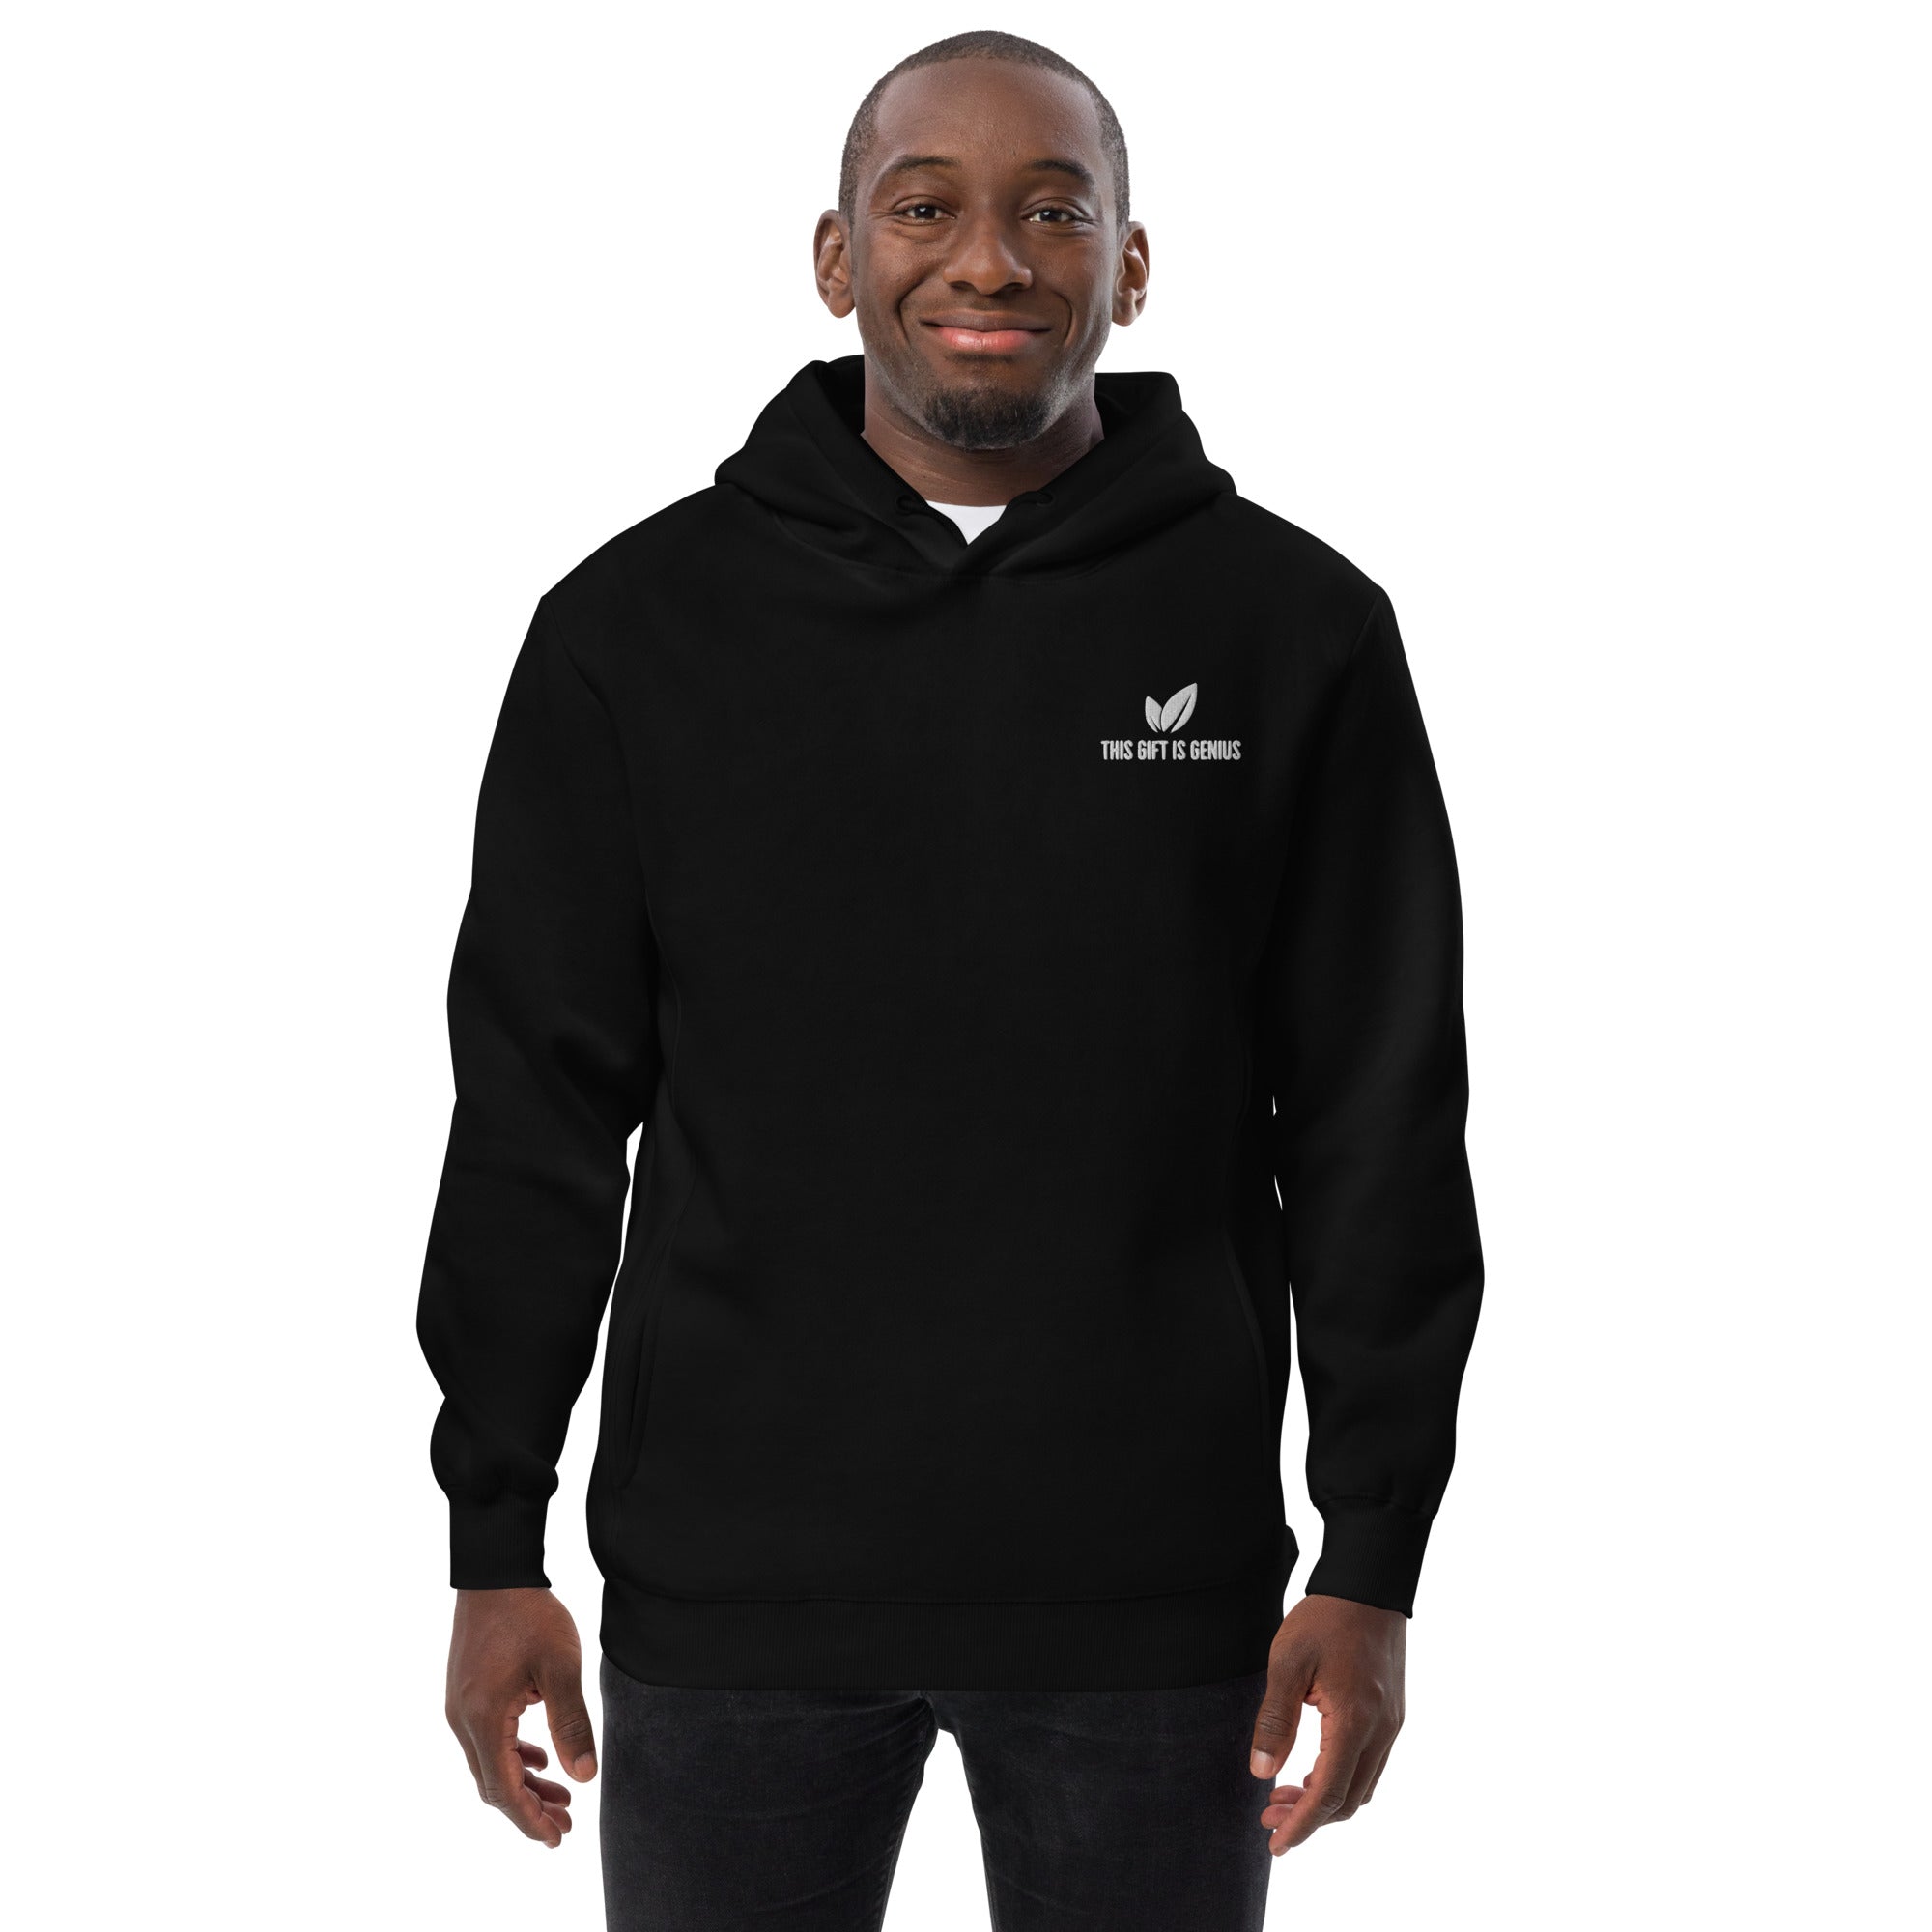 Vacation or Vaccine -- Unisex fashion hoodie